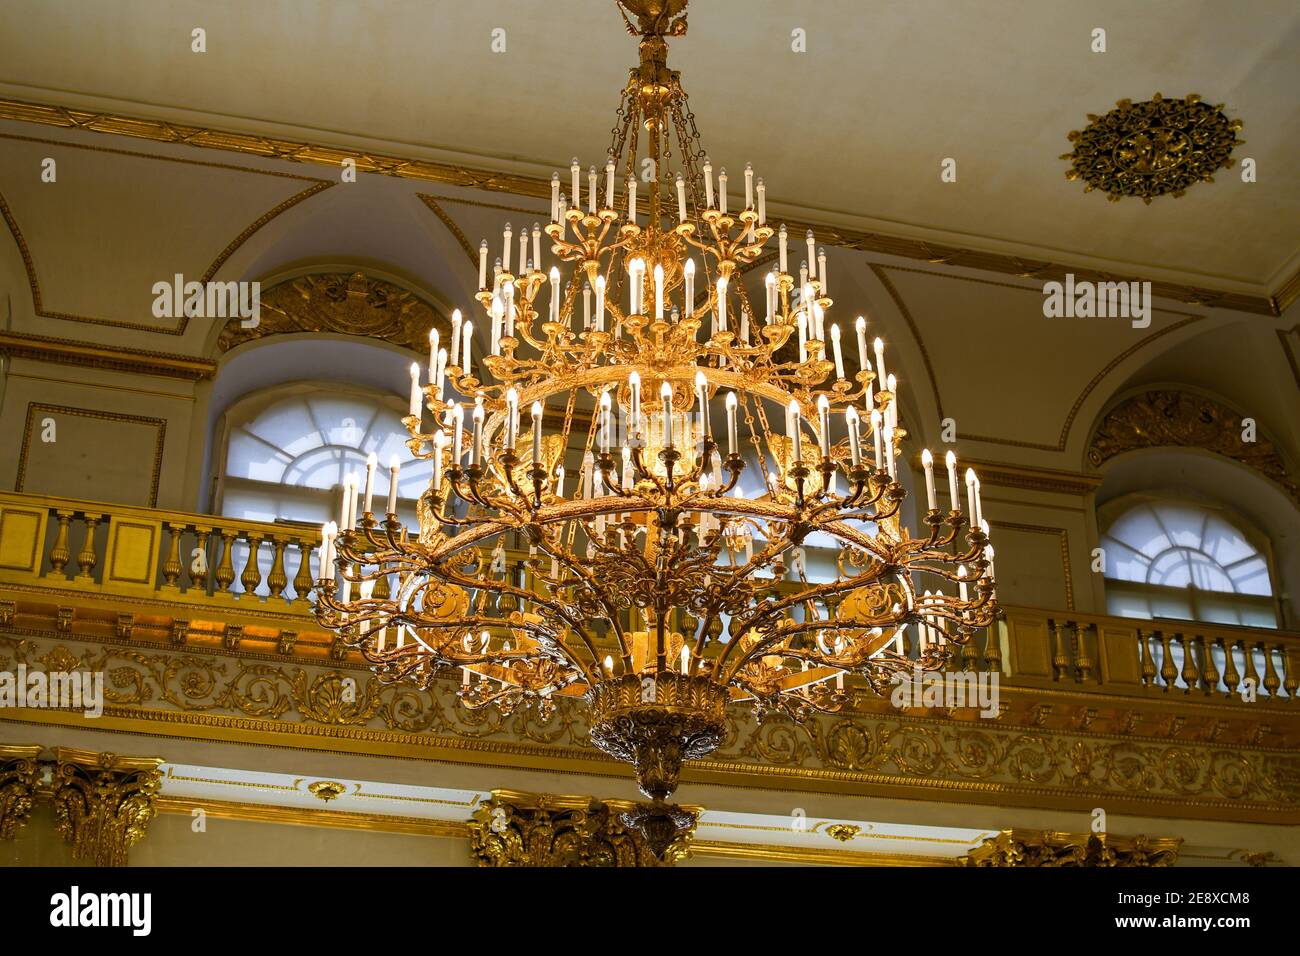 An ornate chandelier hangs in the Hermitage museum in St Petersburg, Russia. Stock Photo